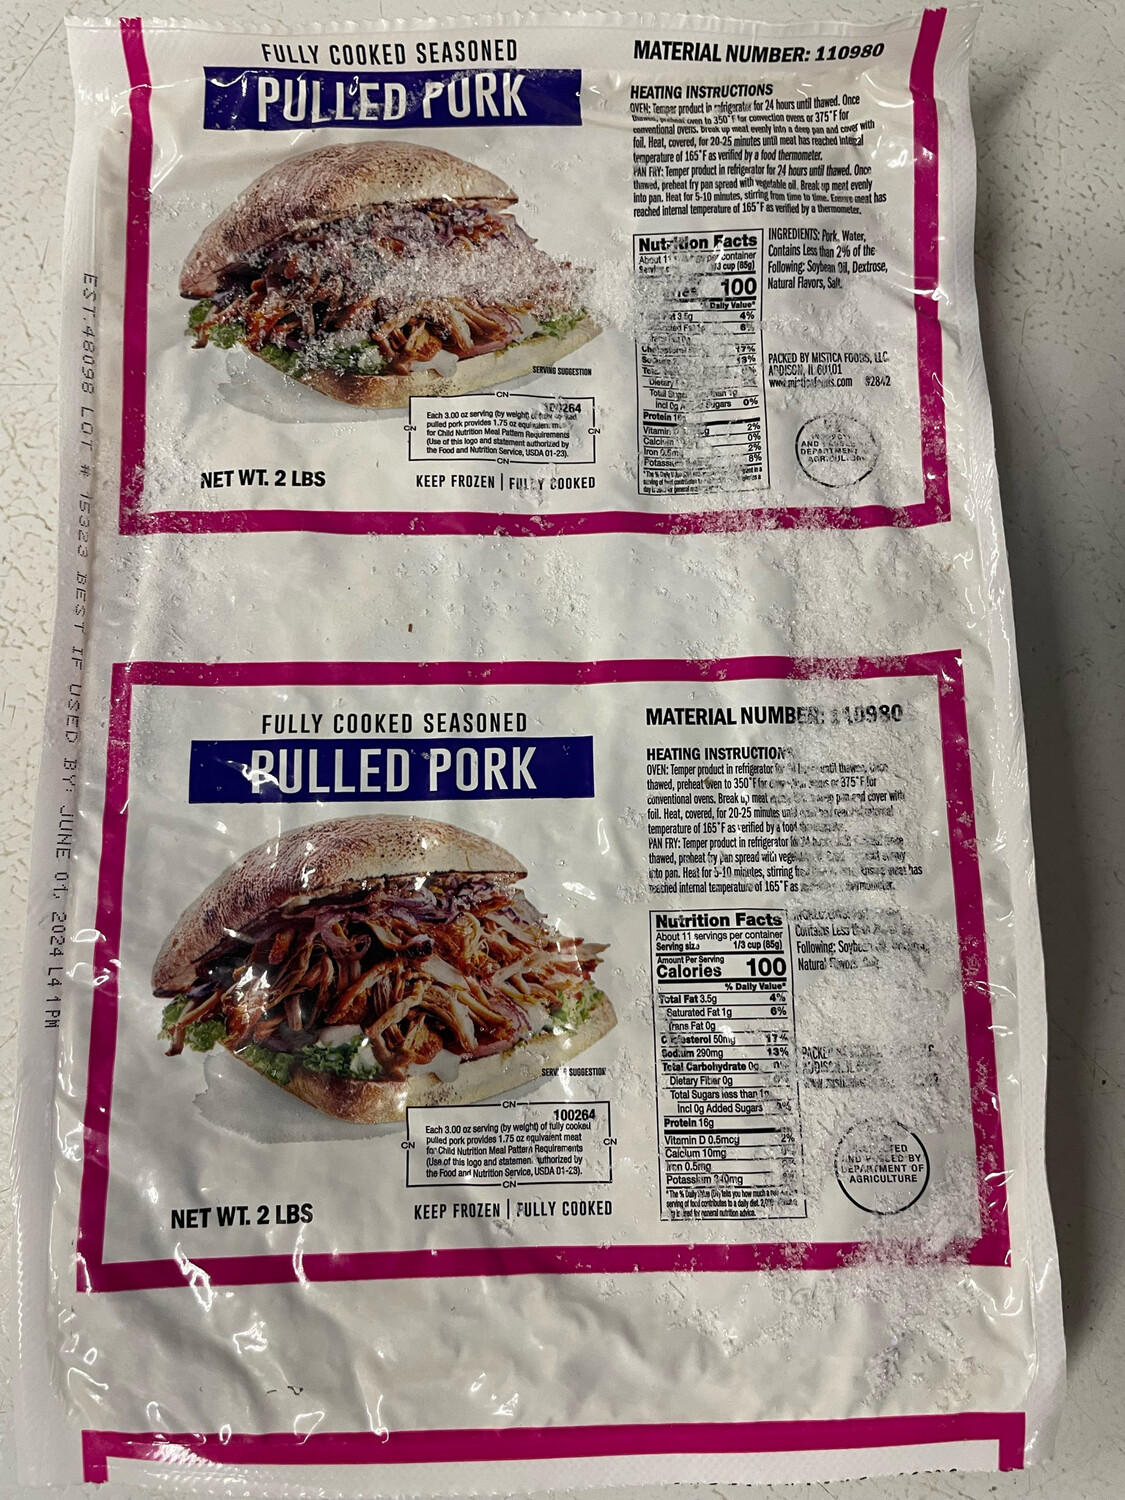 Pulled Pork (fully cooked)